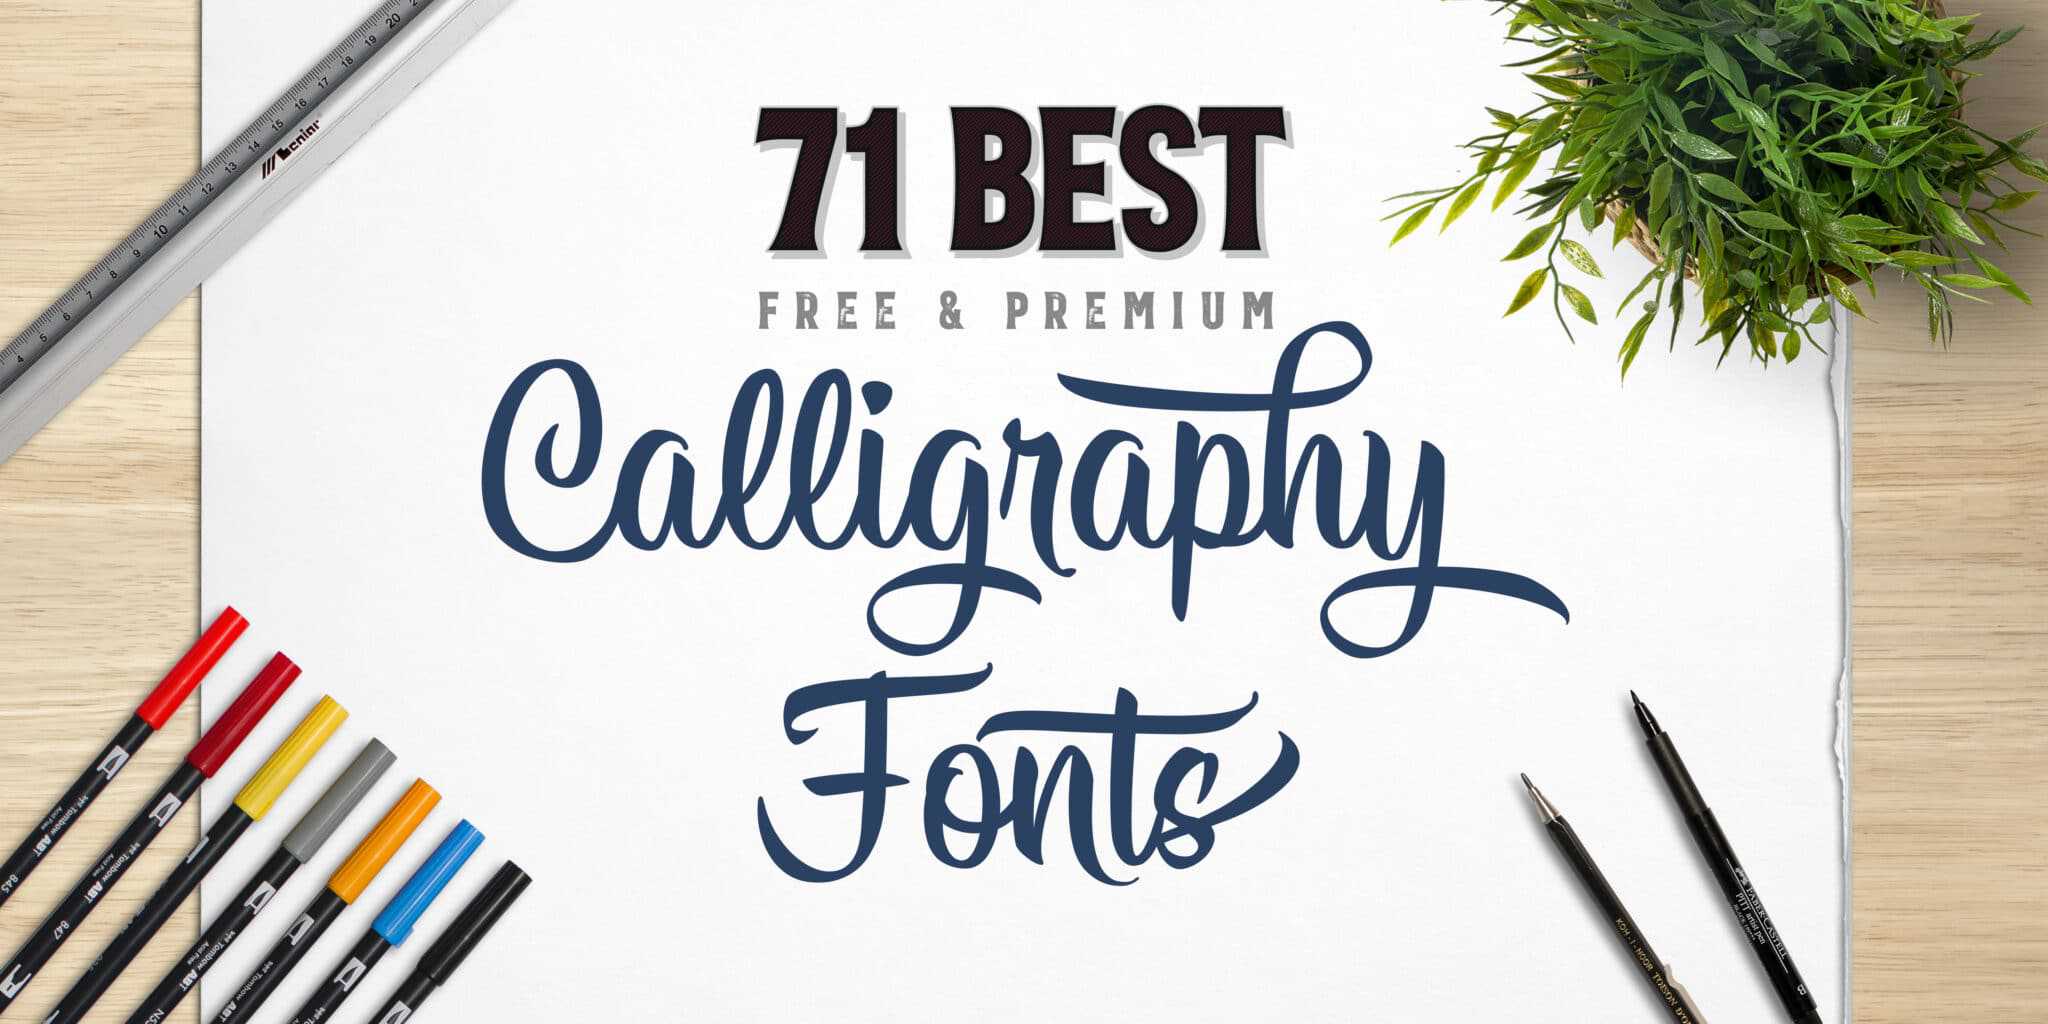 best free fonts for ipad